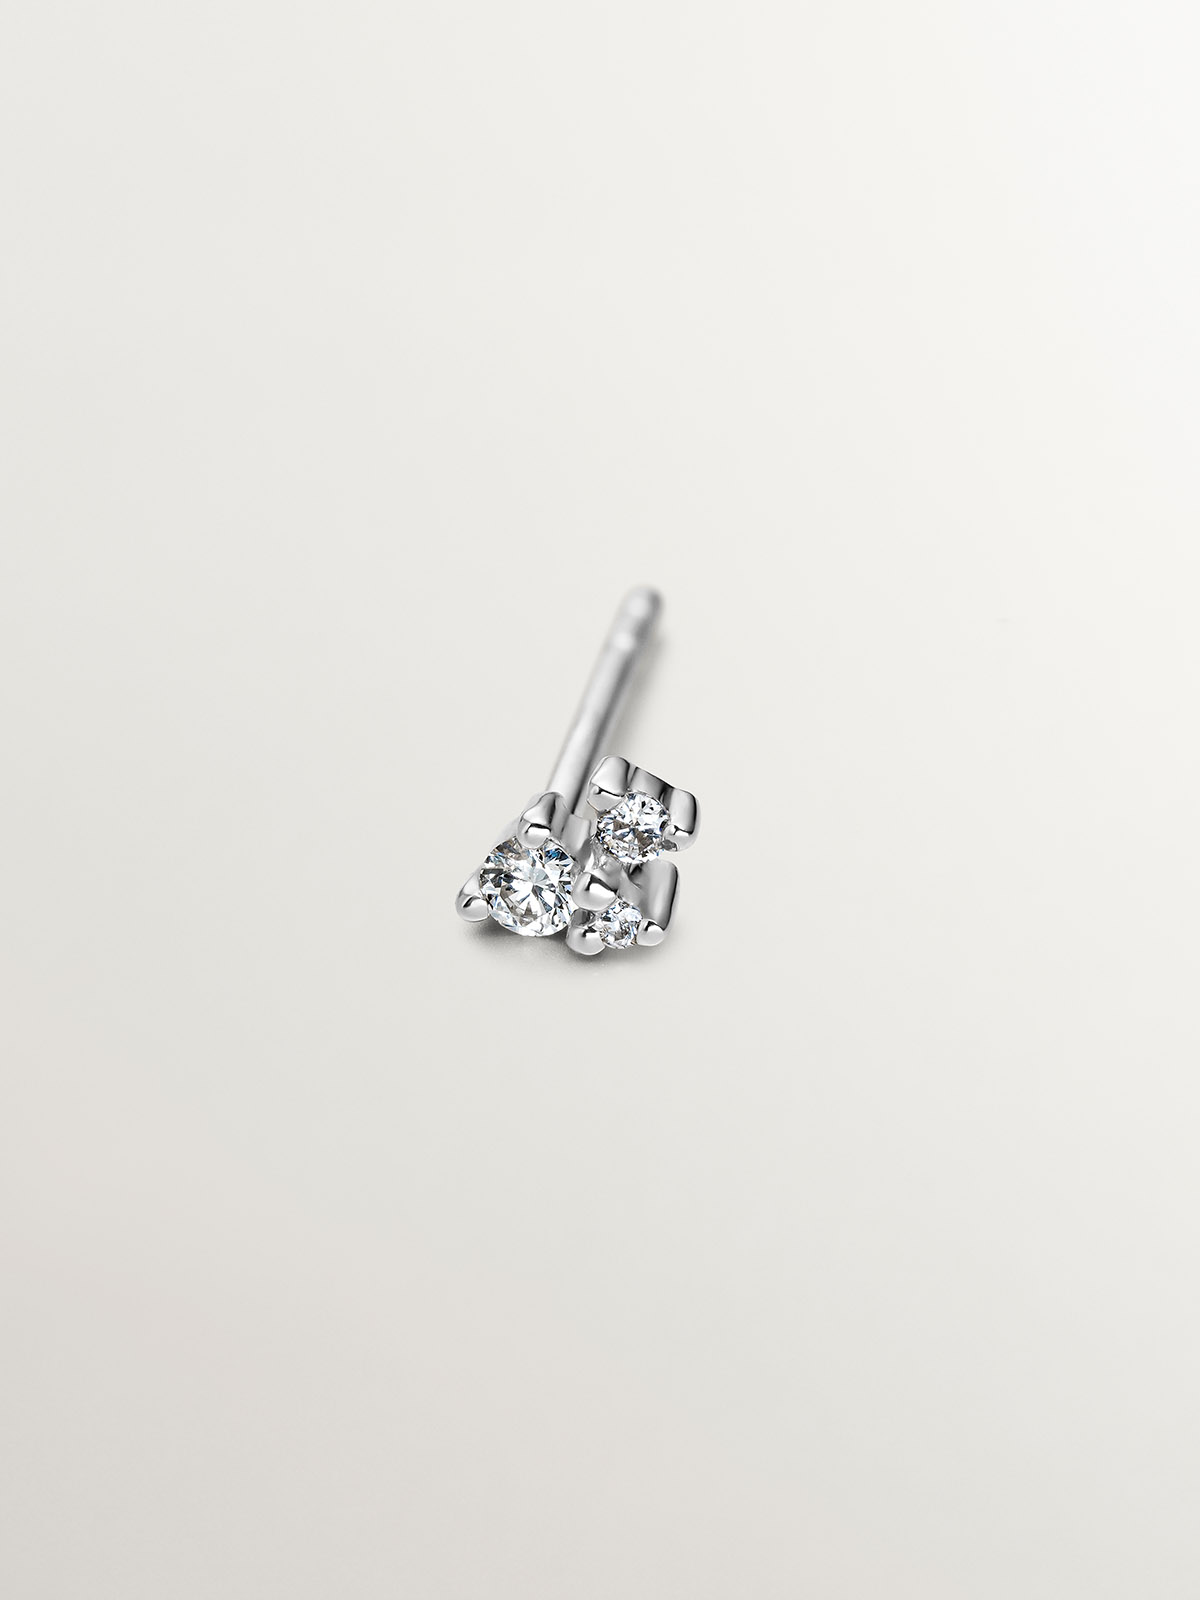 Individual 9K white gold earring with diamonds